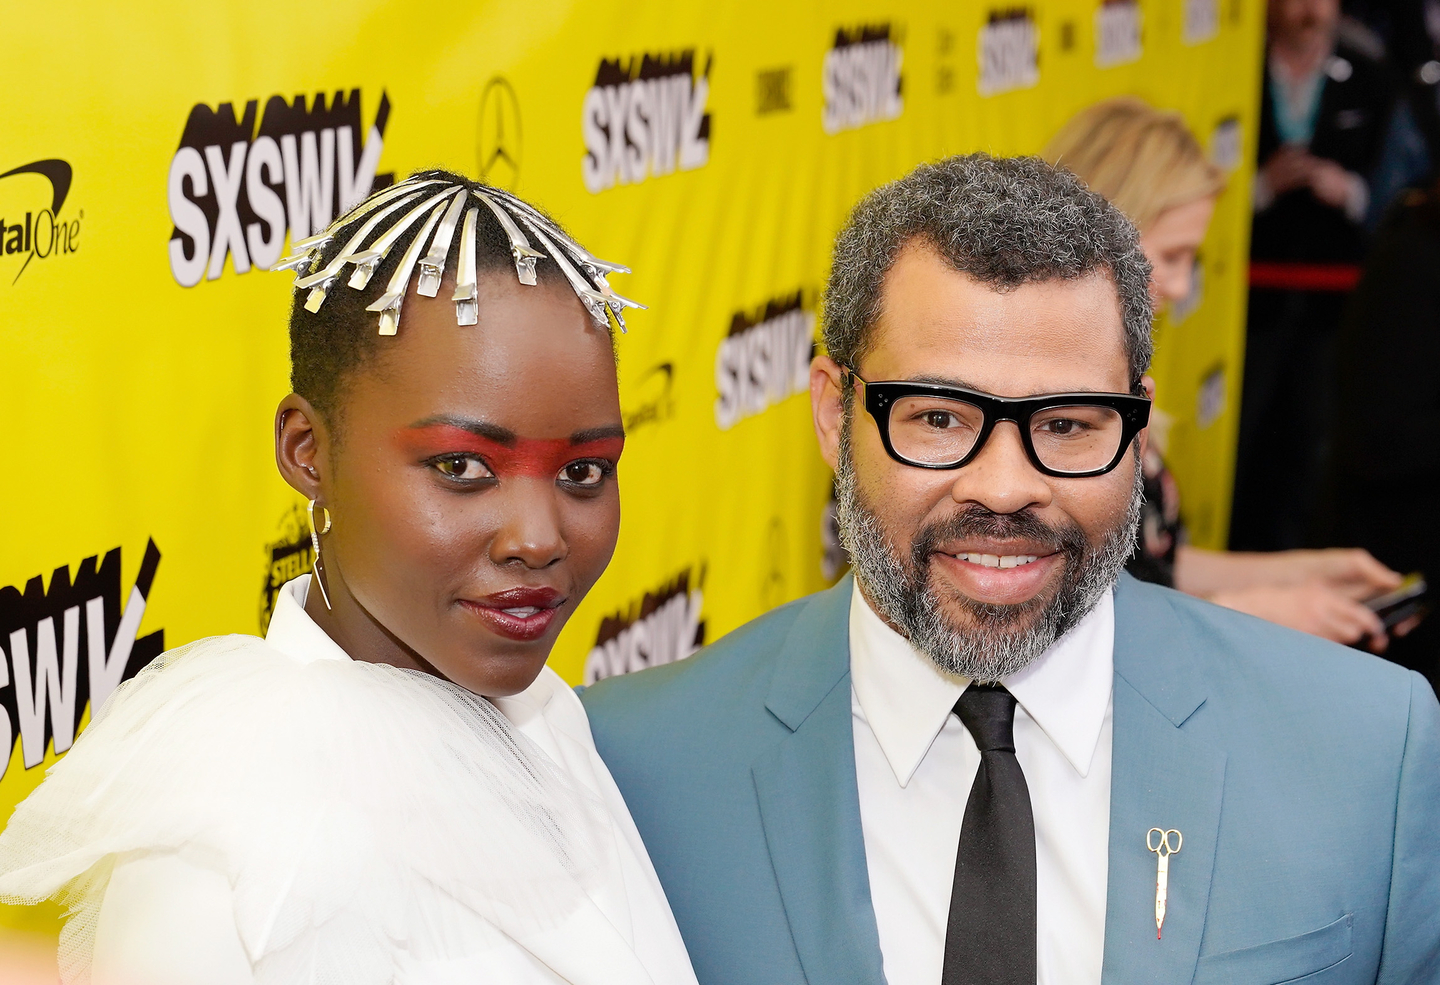 Lupita Nyong'o and Jordan Peele on the red carpet for Us world premiere at the Paramount Theatre - Photo by Ismael Quintanilla/Getty Images for SXSW